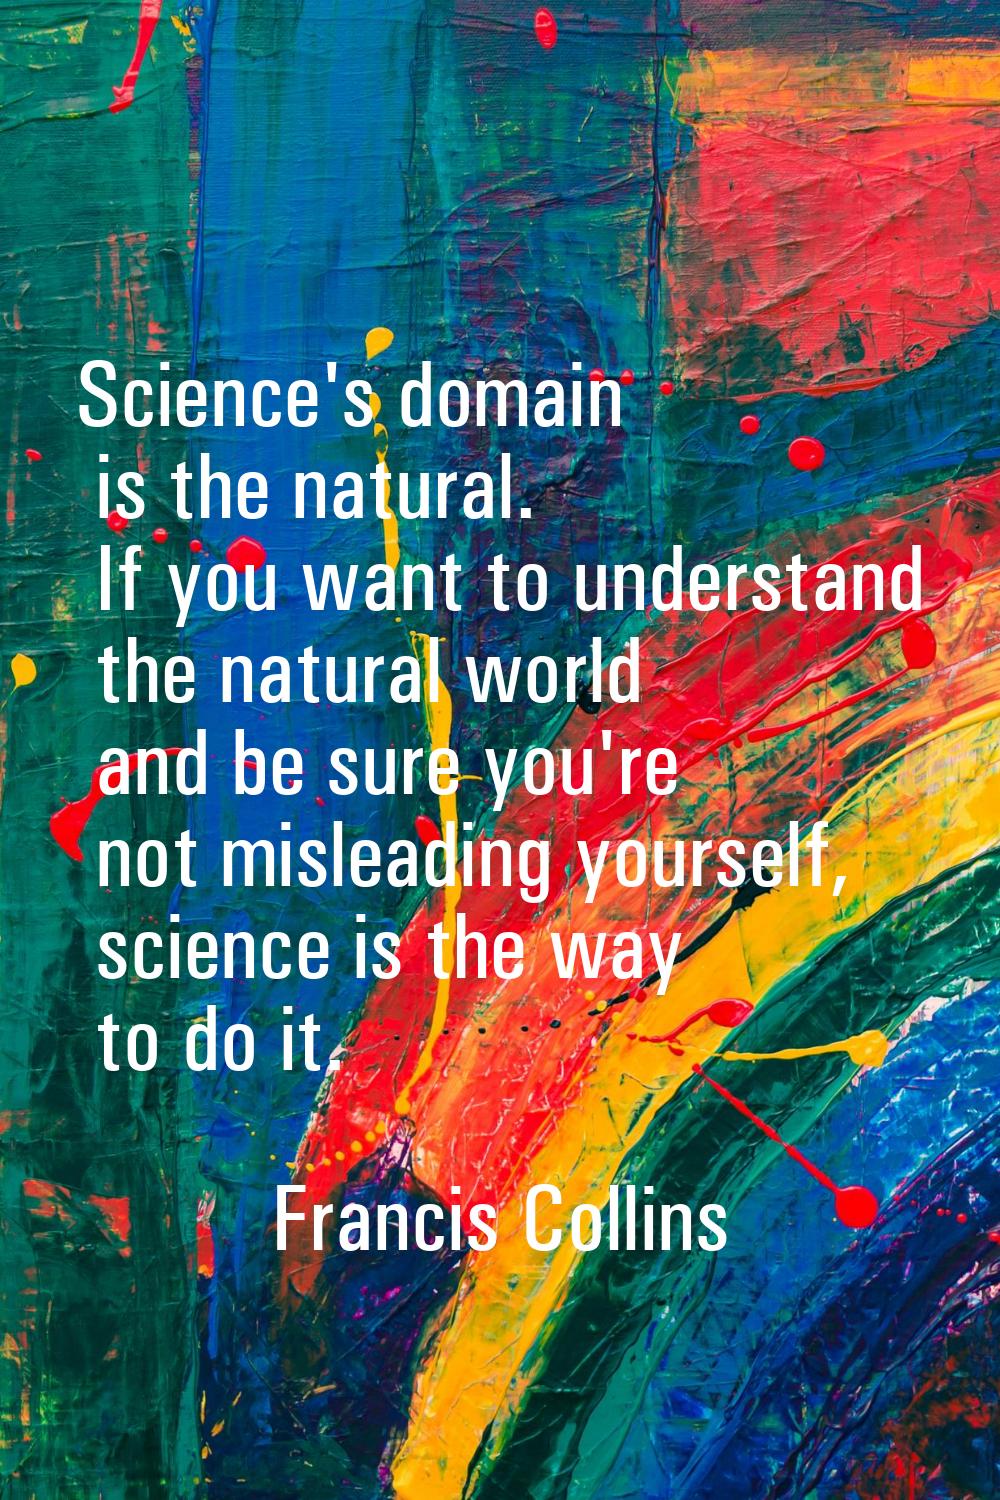 Science's domain is the natural. If you want to understand the natural world and be sure you're not